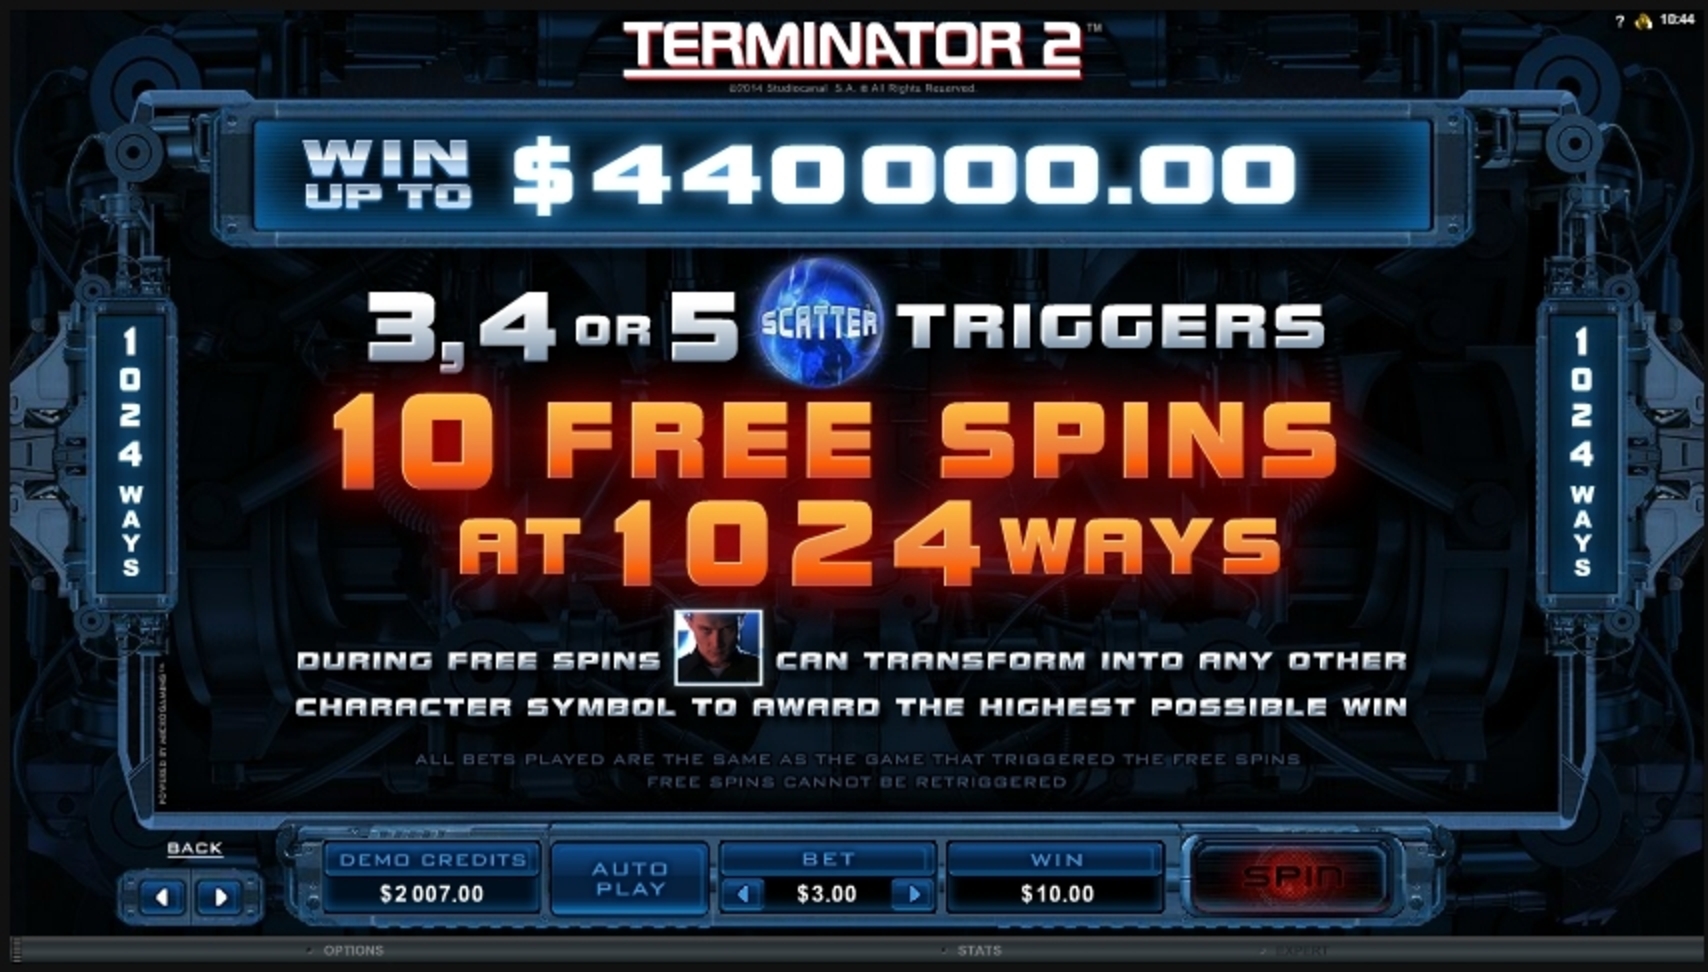 Info of Terminator 2 Slot Game by Microgaming